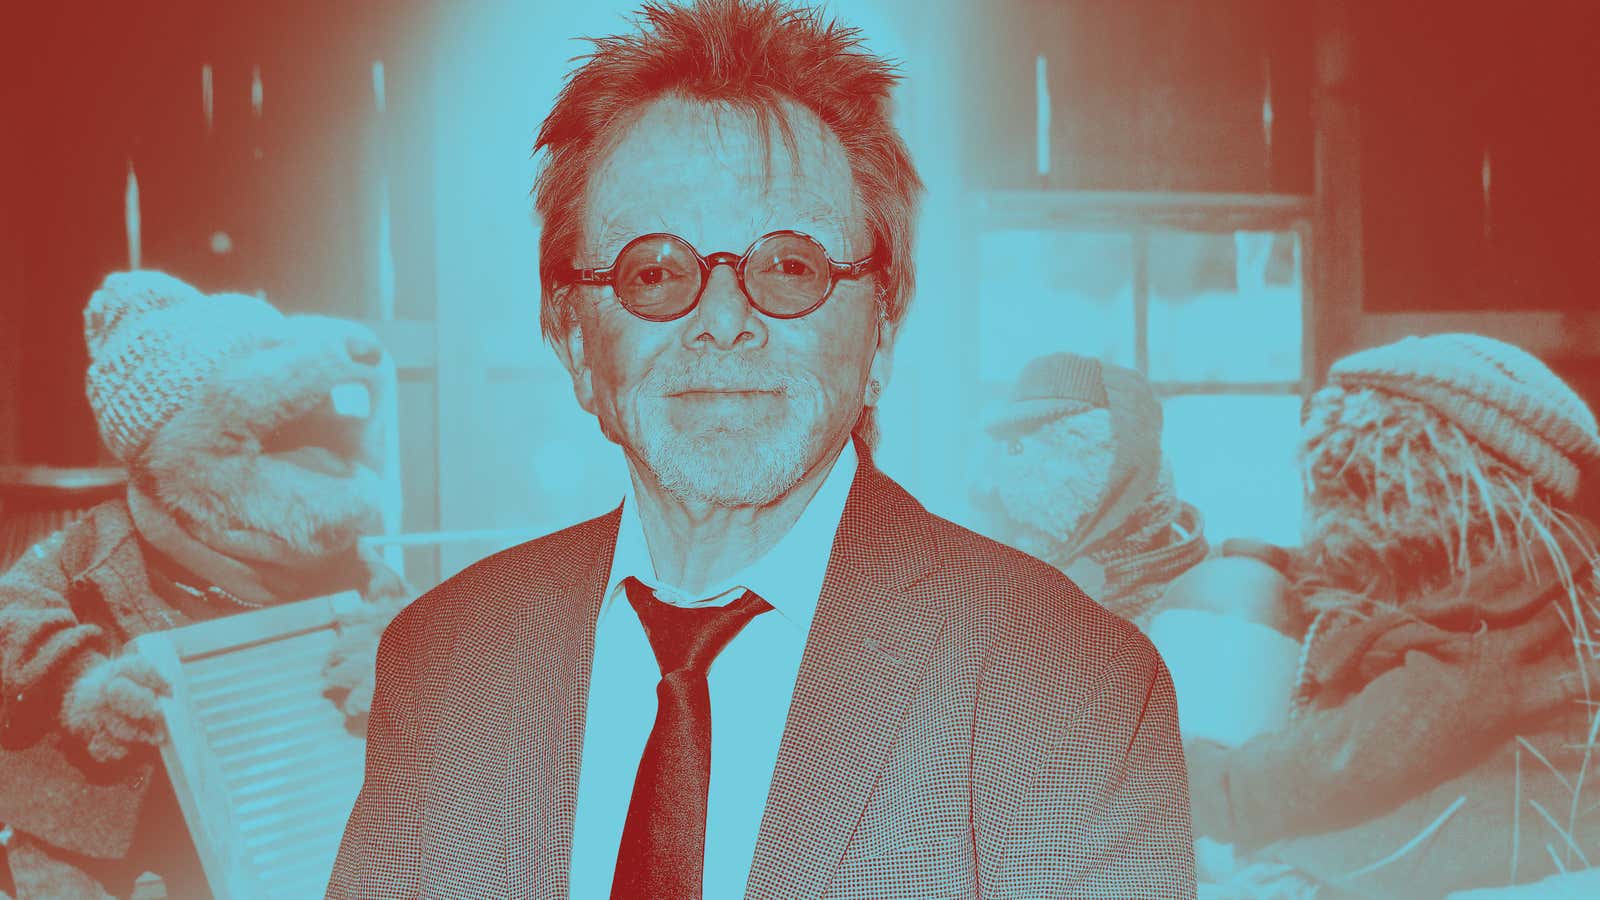 Paul Williams on the enduring magic and no-longer-lost music of <i>Emmet Otter’s Jug Band Christmas</i>